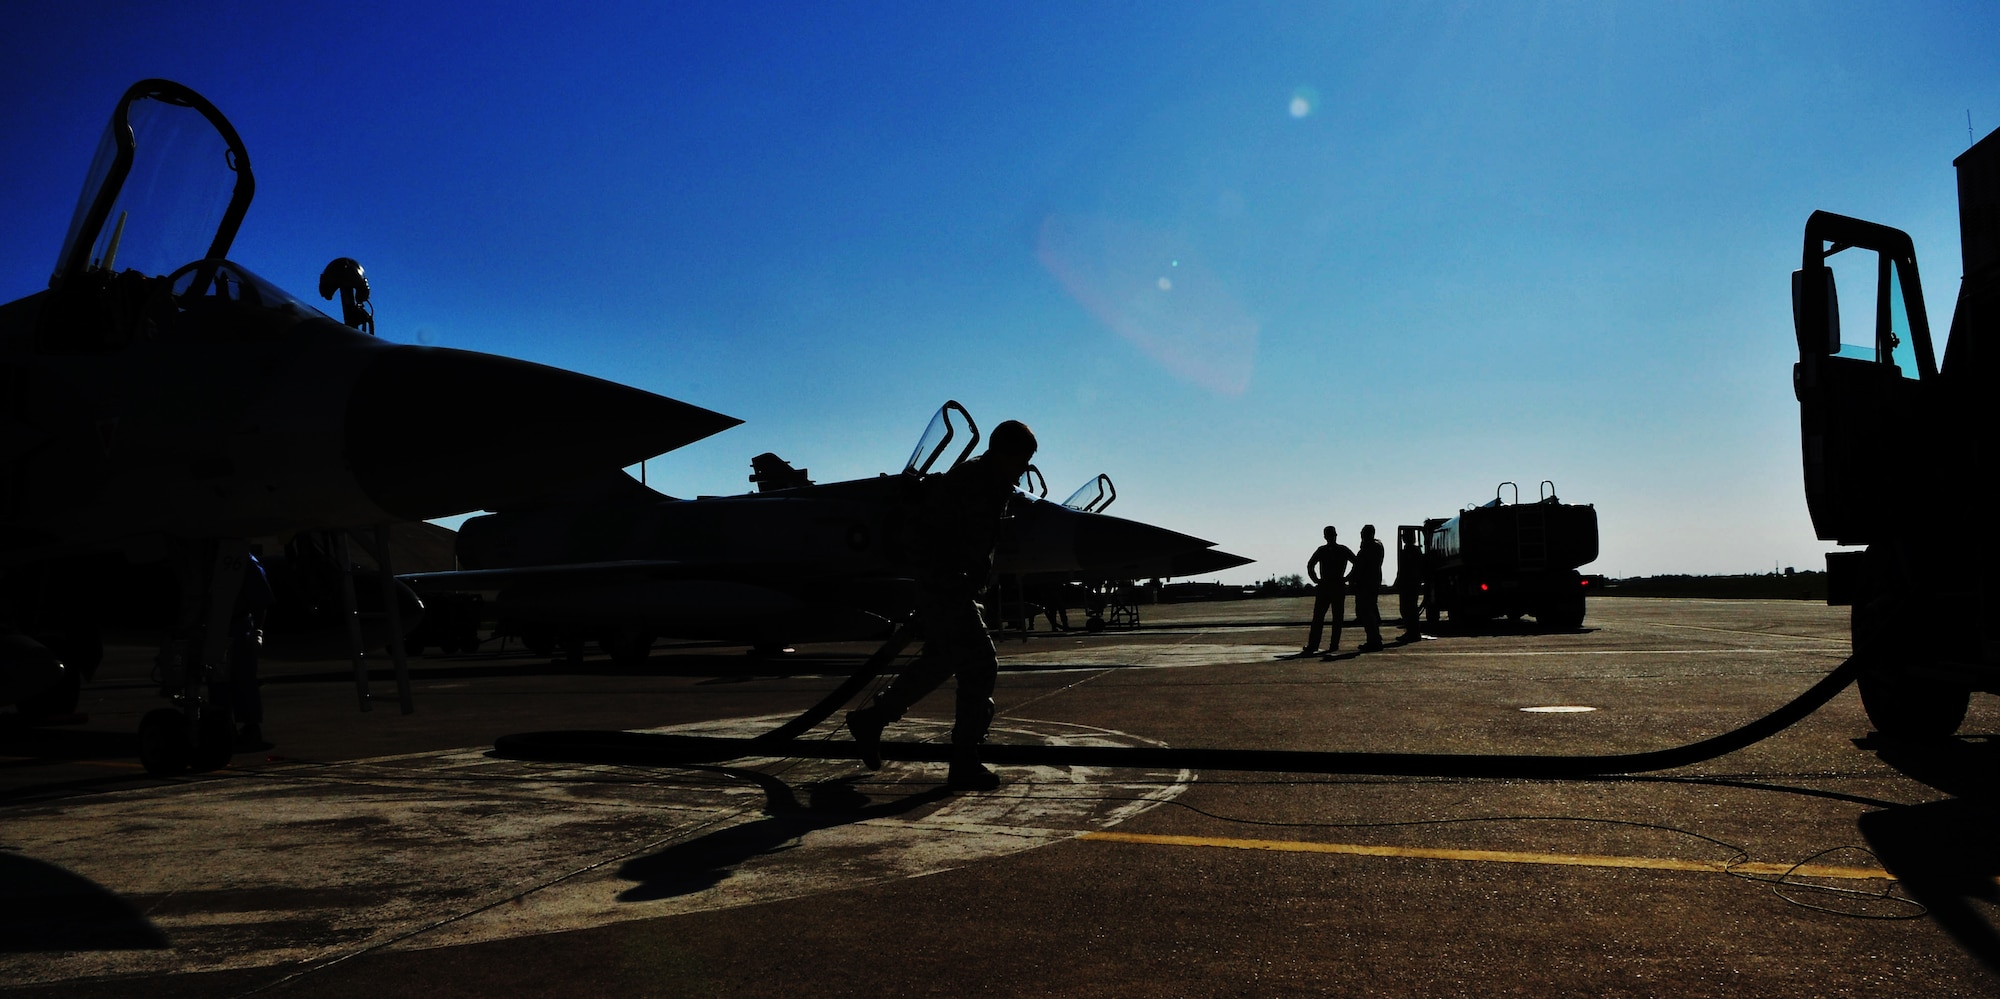 Senior Airman Kevin Kloss, of the 39th Logistics Readiness Squadron, finishes refueling Qatari aircraft in support of Operation Odyssey Dawn March 25, 2011, at Incirlik Air Base, Turkey.  Joint Task Force Odyssey Dawn is the U.S. Africa Command task force established to provide operational and tactical command and control of U.S. military forces supporting the international response to the unrest in Libya and enforcement of United Nations Security Council Resolution 1973. UNSCR 1973 authorized all necessary measures to protect civilians in Libya under threat of attack by Qadhafi regime forces. JTF Odyssey Dawn is commanded by U.S. Navy Admiral Samuel J. Locklear, III. (U.S. Air Force photo by Staff Sgt. Alexandre Montes)